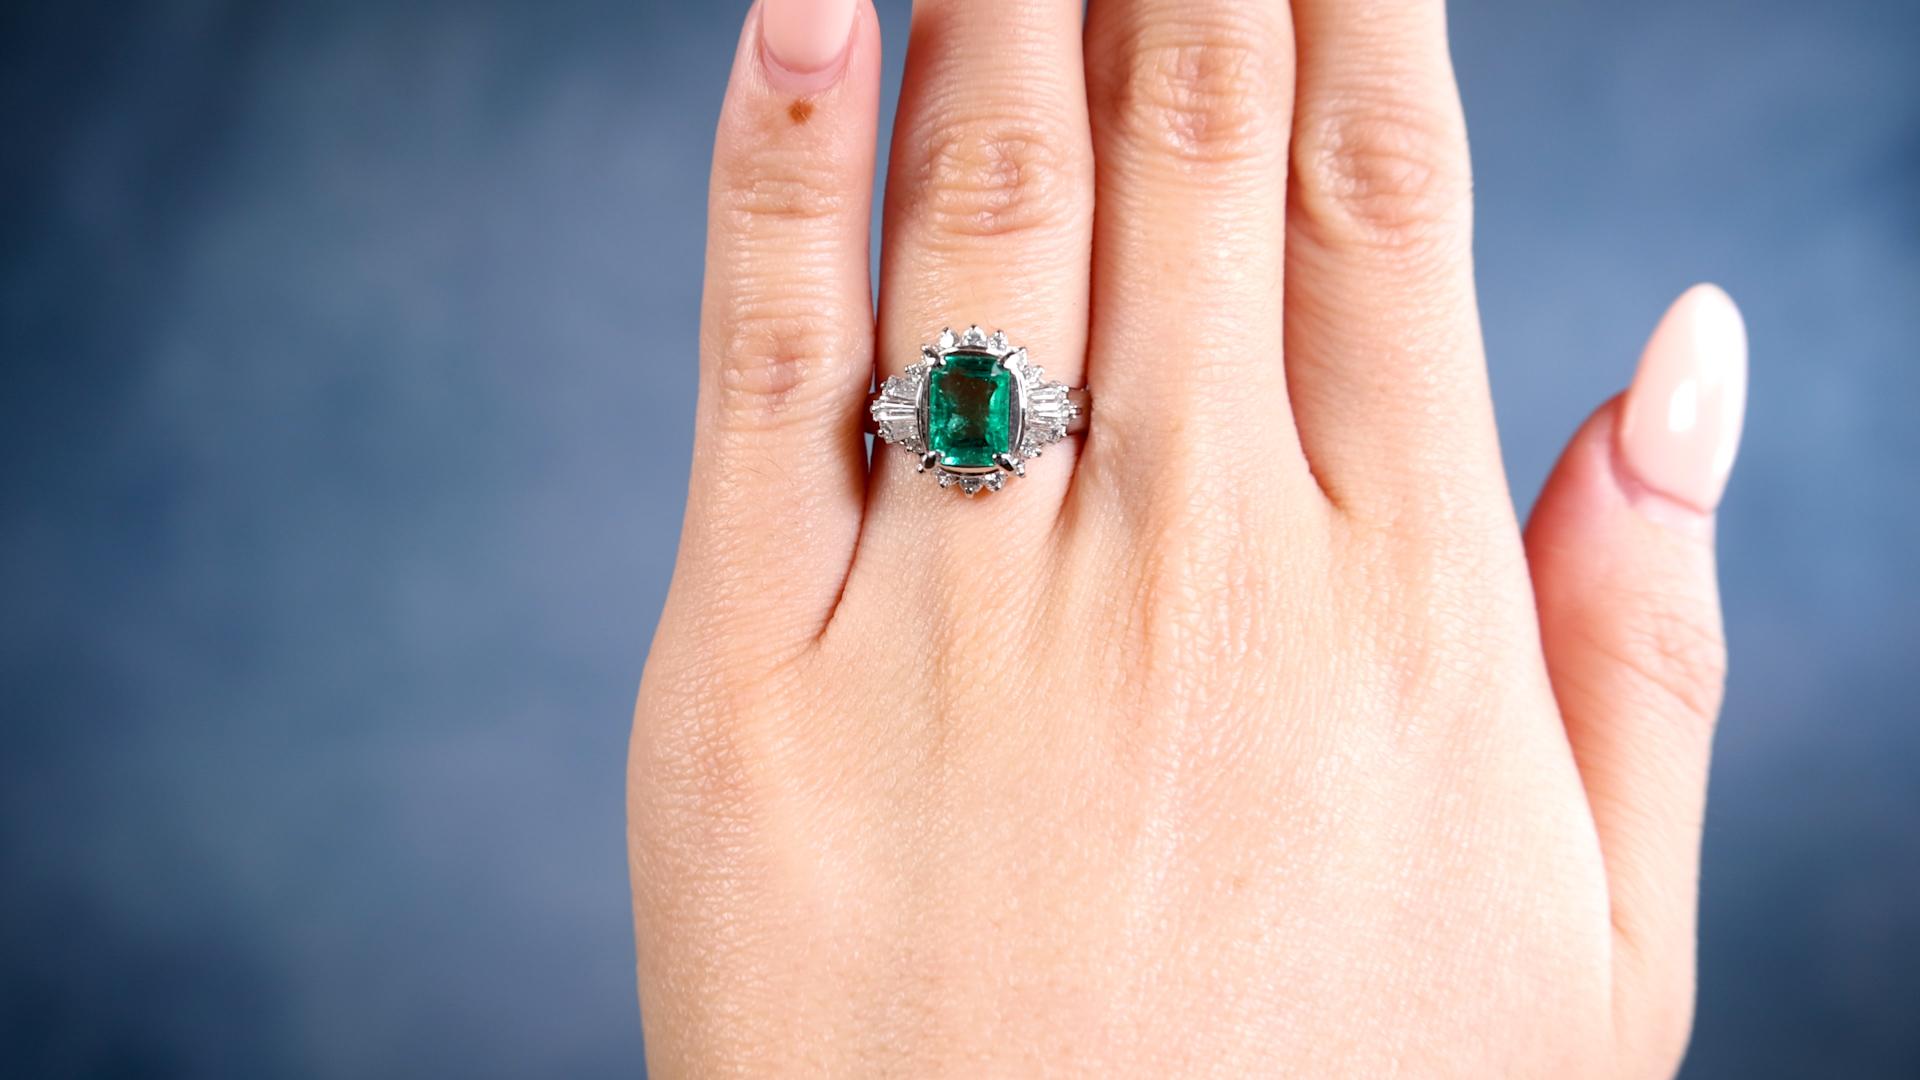 One Vintage 1.20 Carat Emerald and Diamond Platinum Cluster Ring. Featuring one octagonal step cut emerald of 1.20 carats. Accented by six tapered cut diamonds and 14 round brilliant cut diamonds with a total weight of 0.65 carat, graded